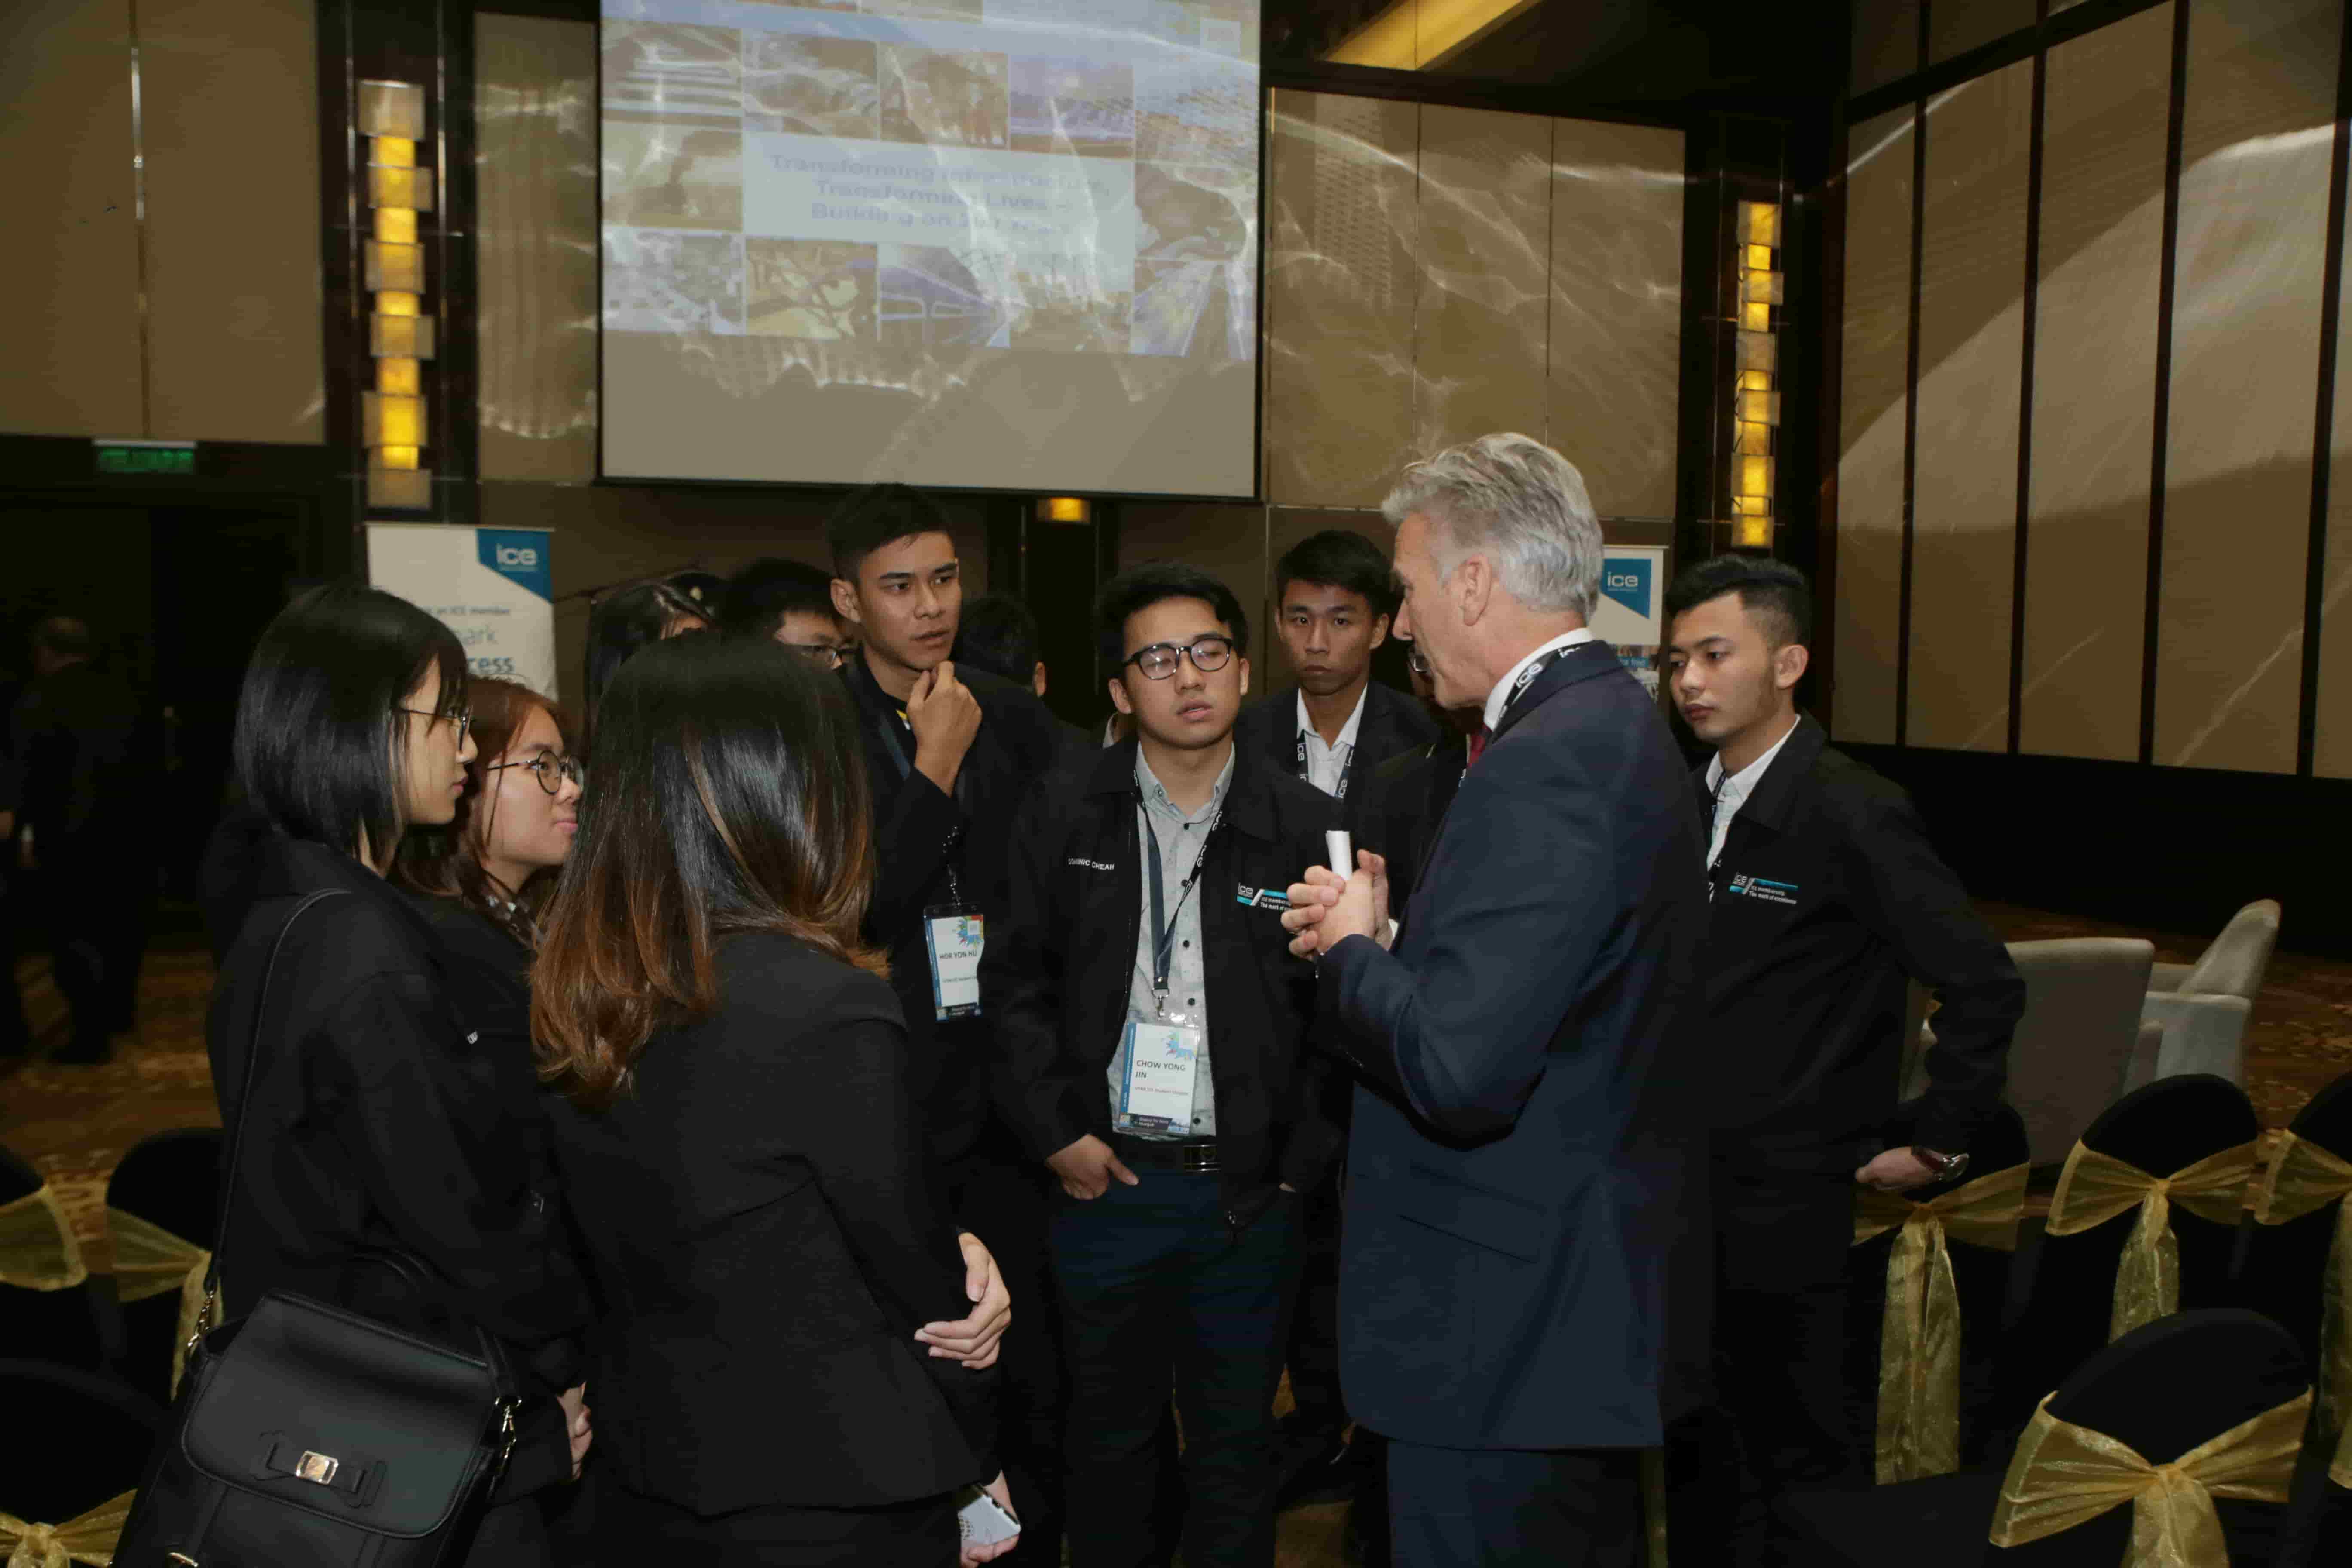 Institution of Civil Engineers (ICE) opens its Malaysian chapter